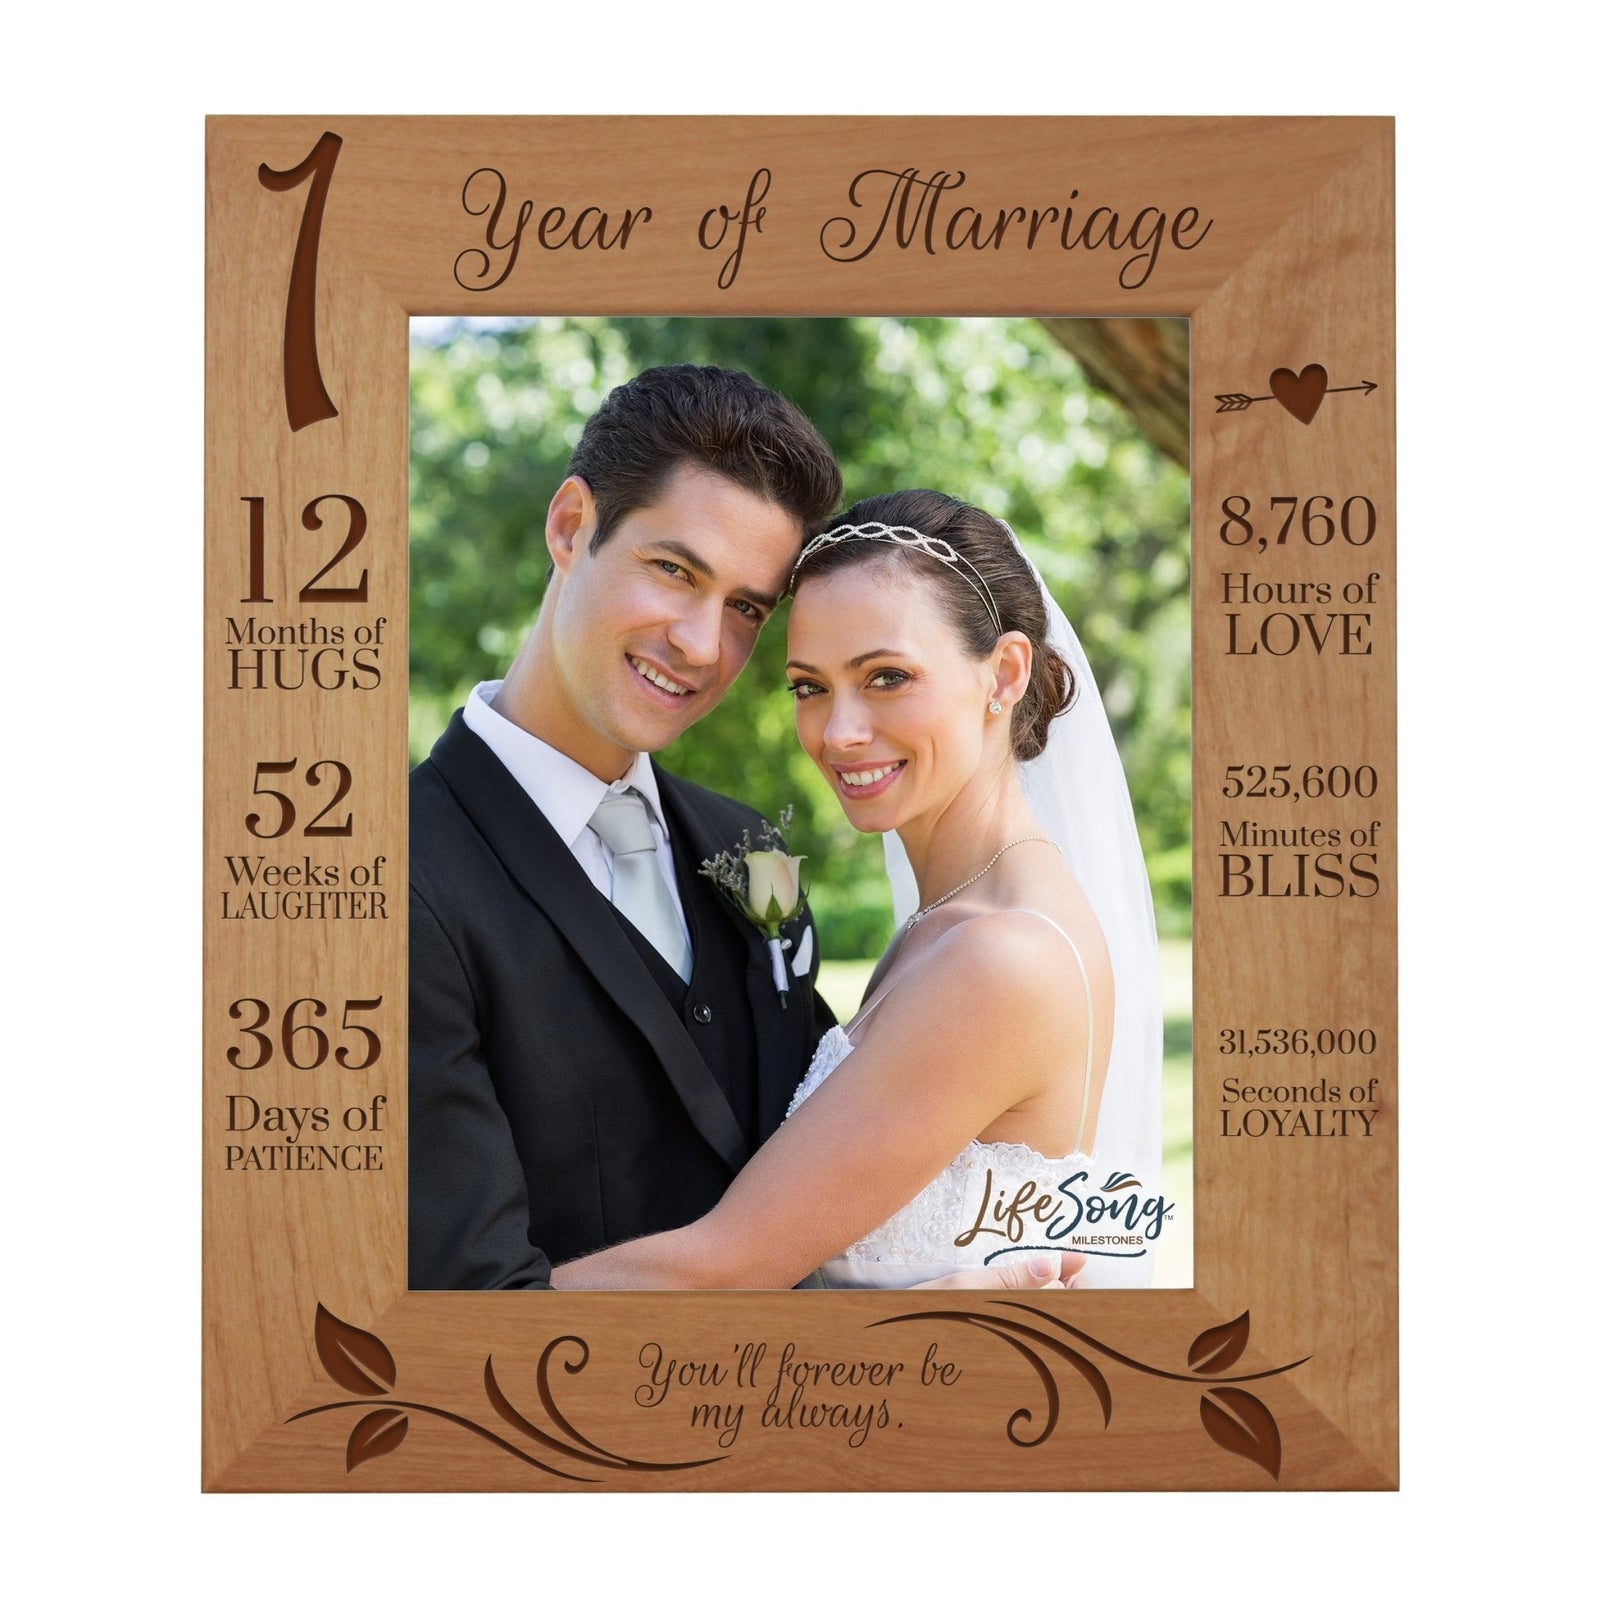 Couples 1st Wedding Anniversary Photo Frame Home Decor Gift Ideas - Forever Be My Always - LifeSong Milestones